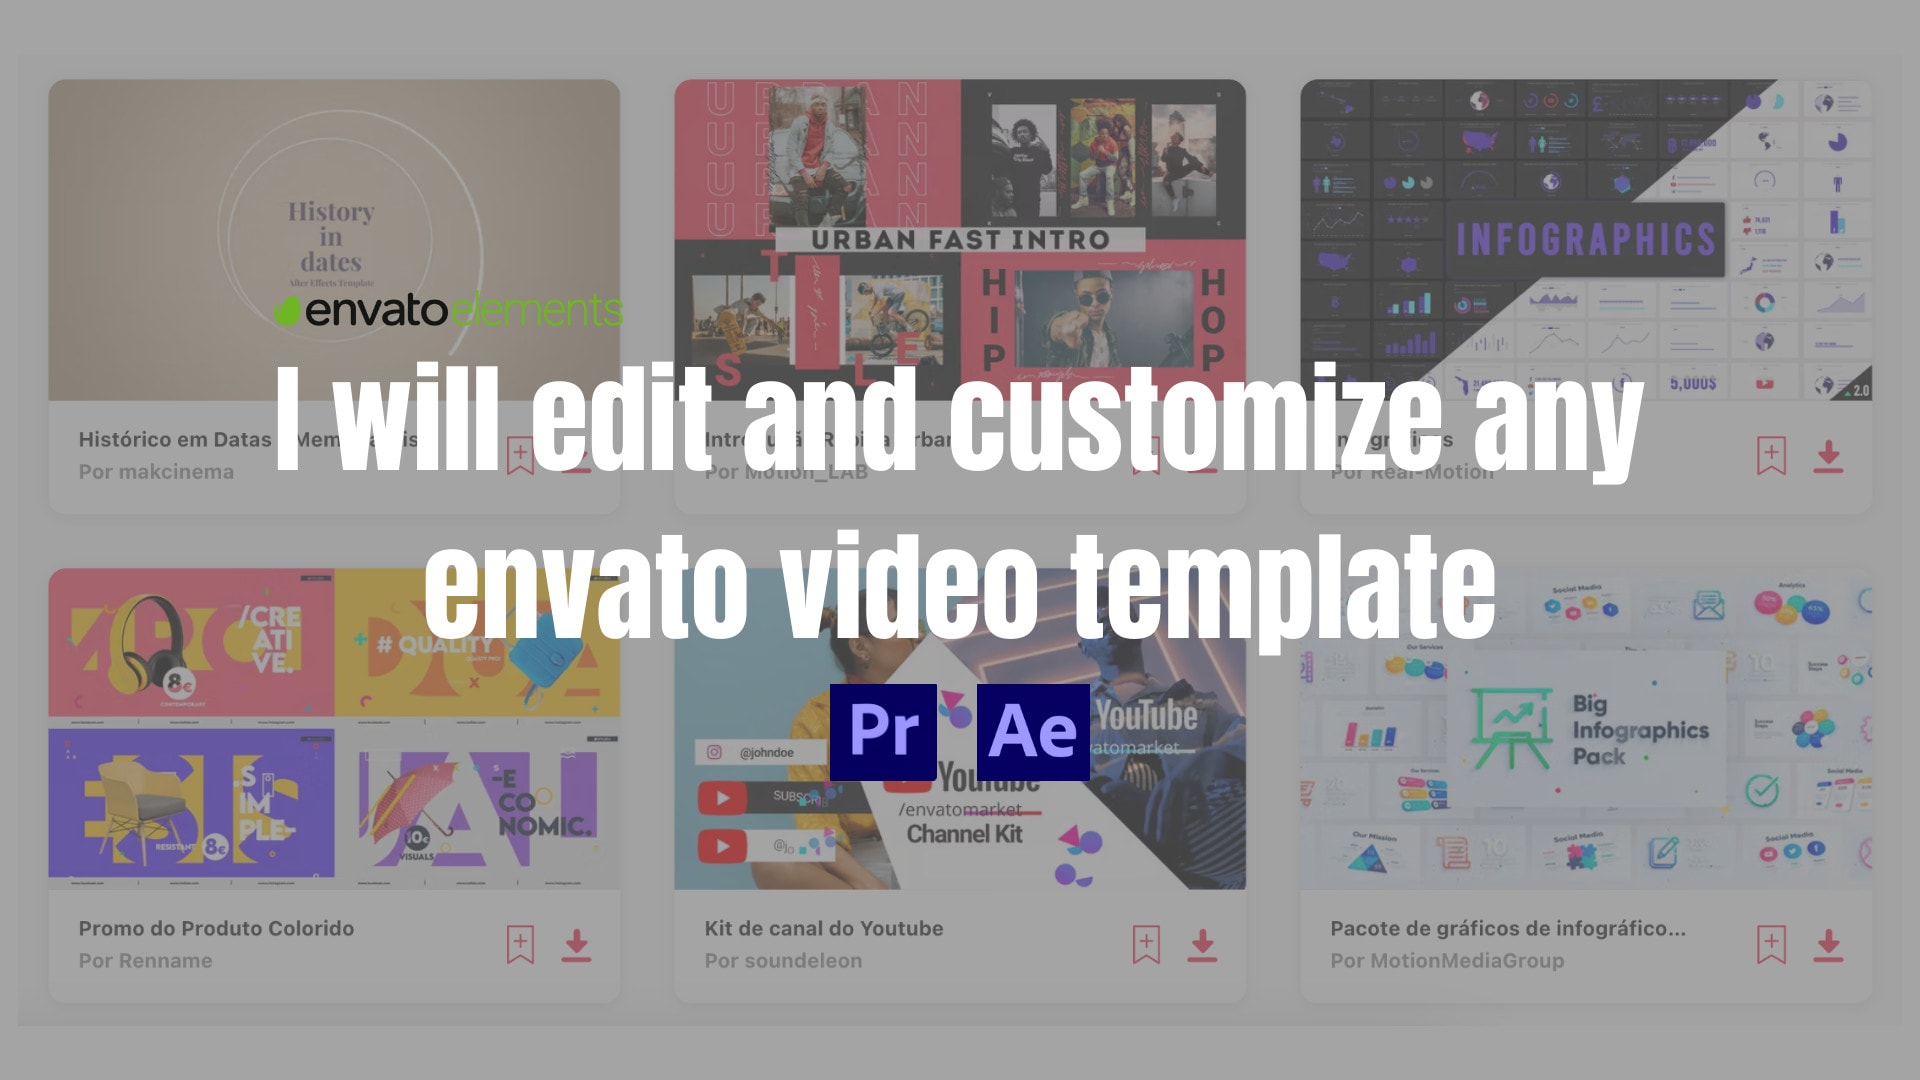 Edit and customize any envato video template by Hannapear | Fiverr